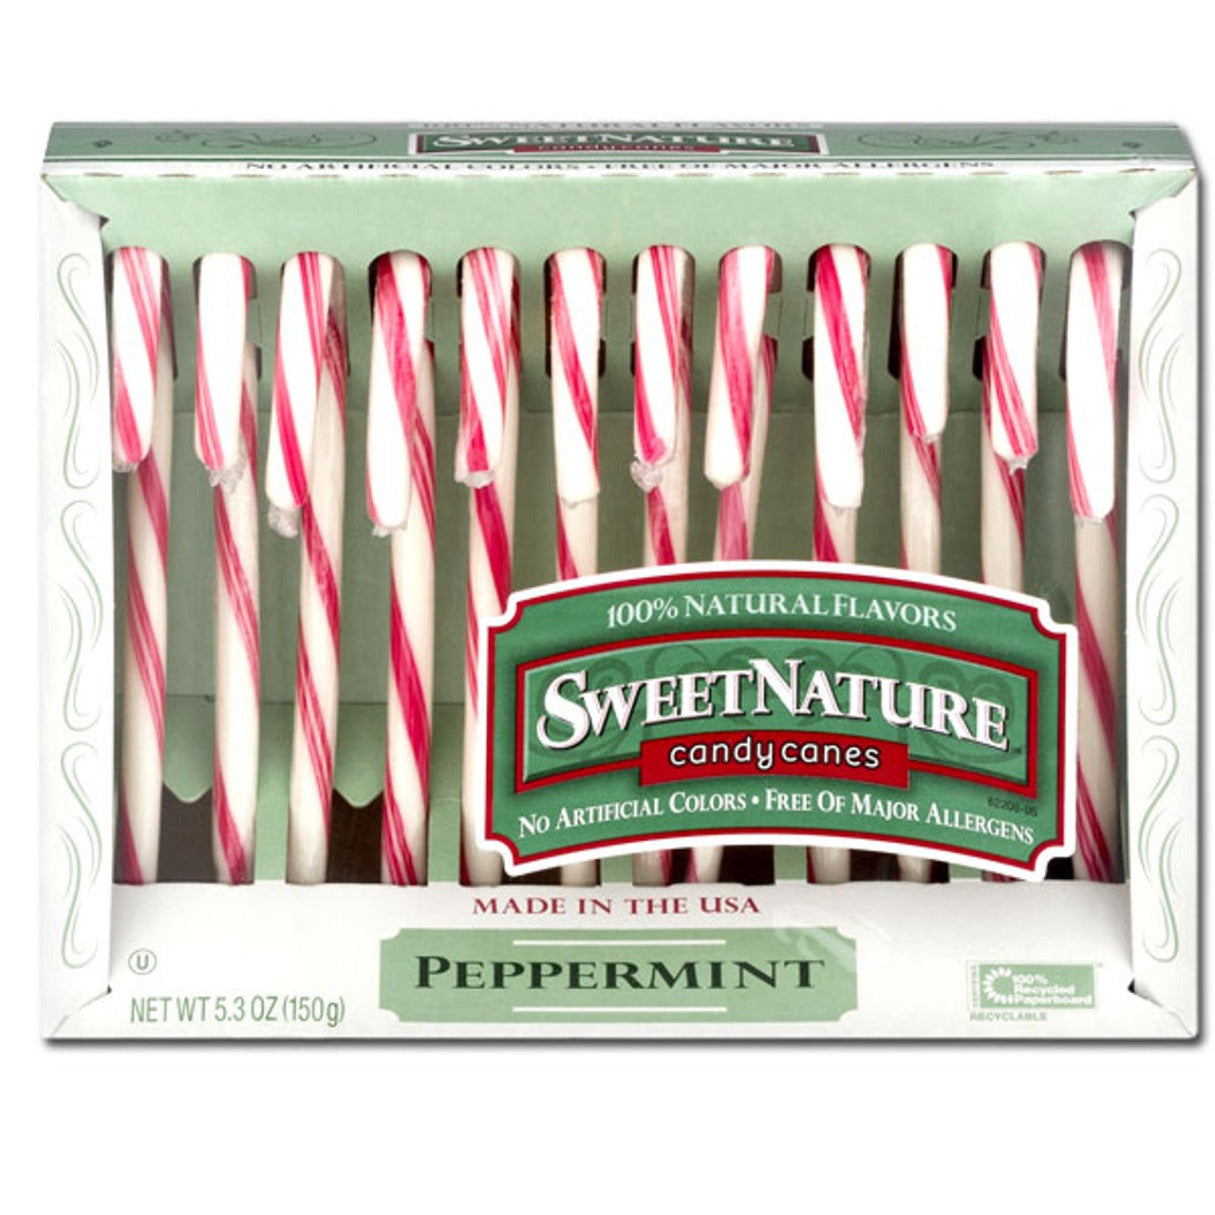 SweetNature Candy Canes Peppermint 5.3oz - 12ct